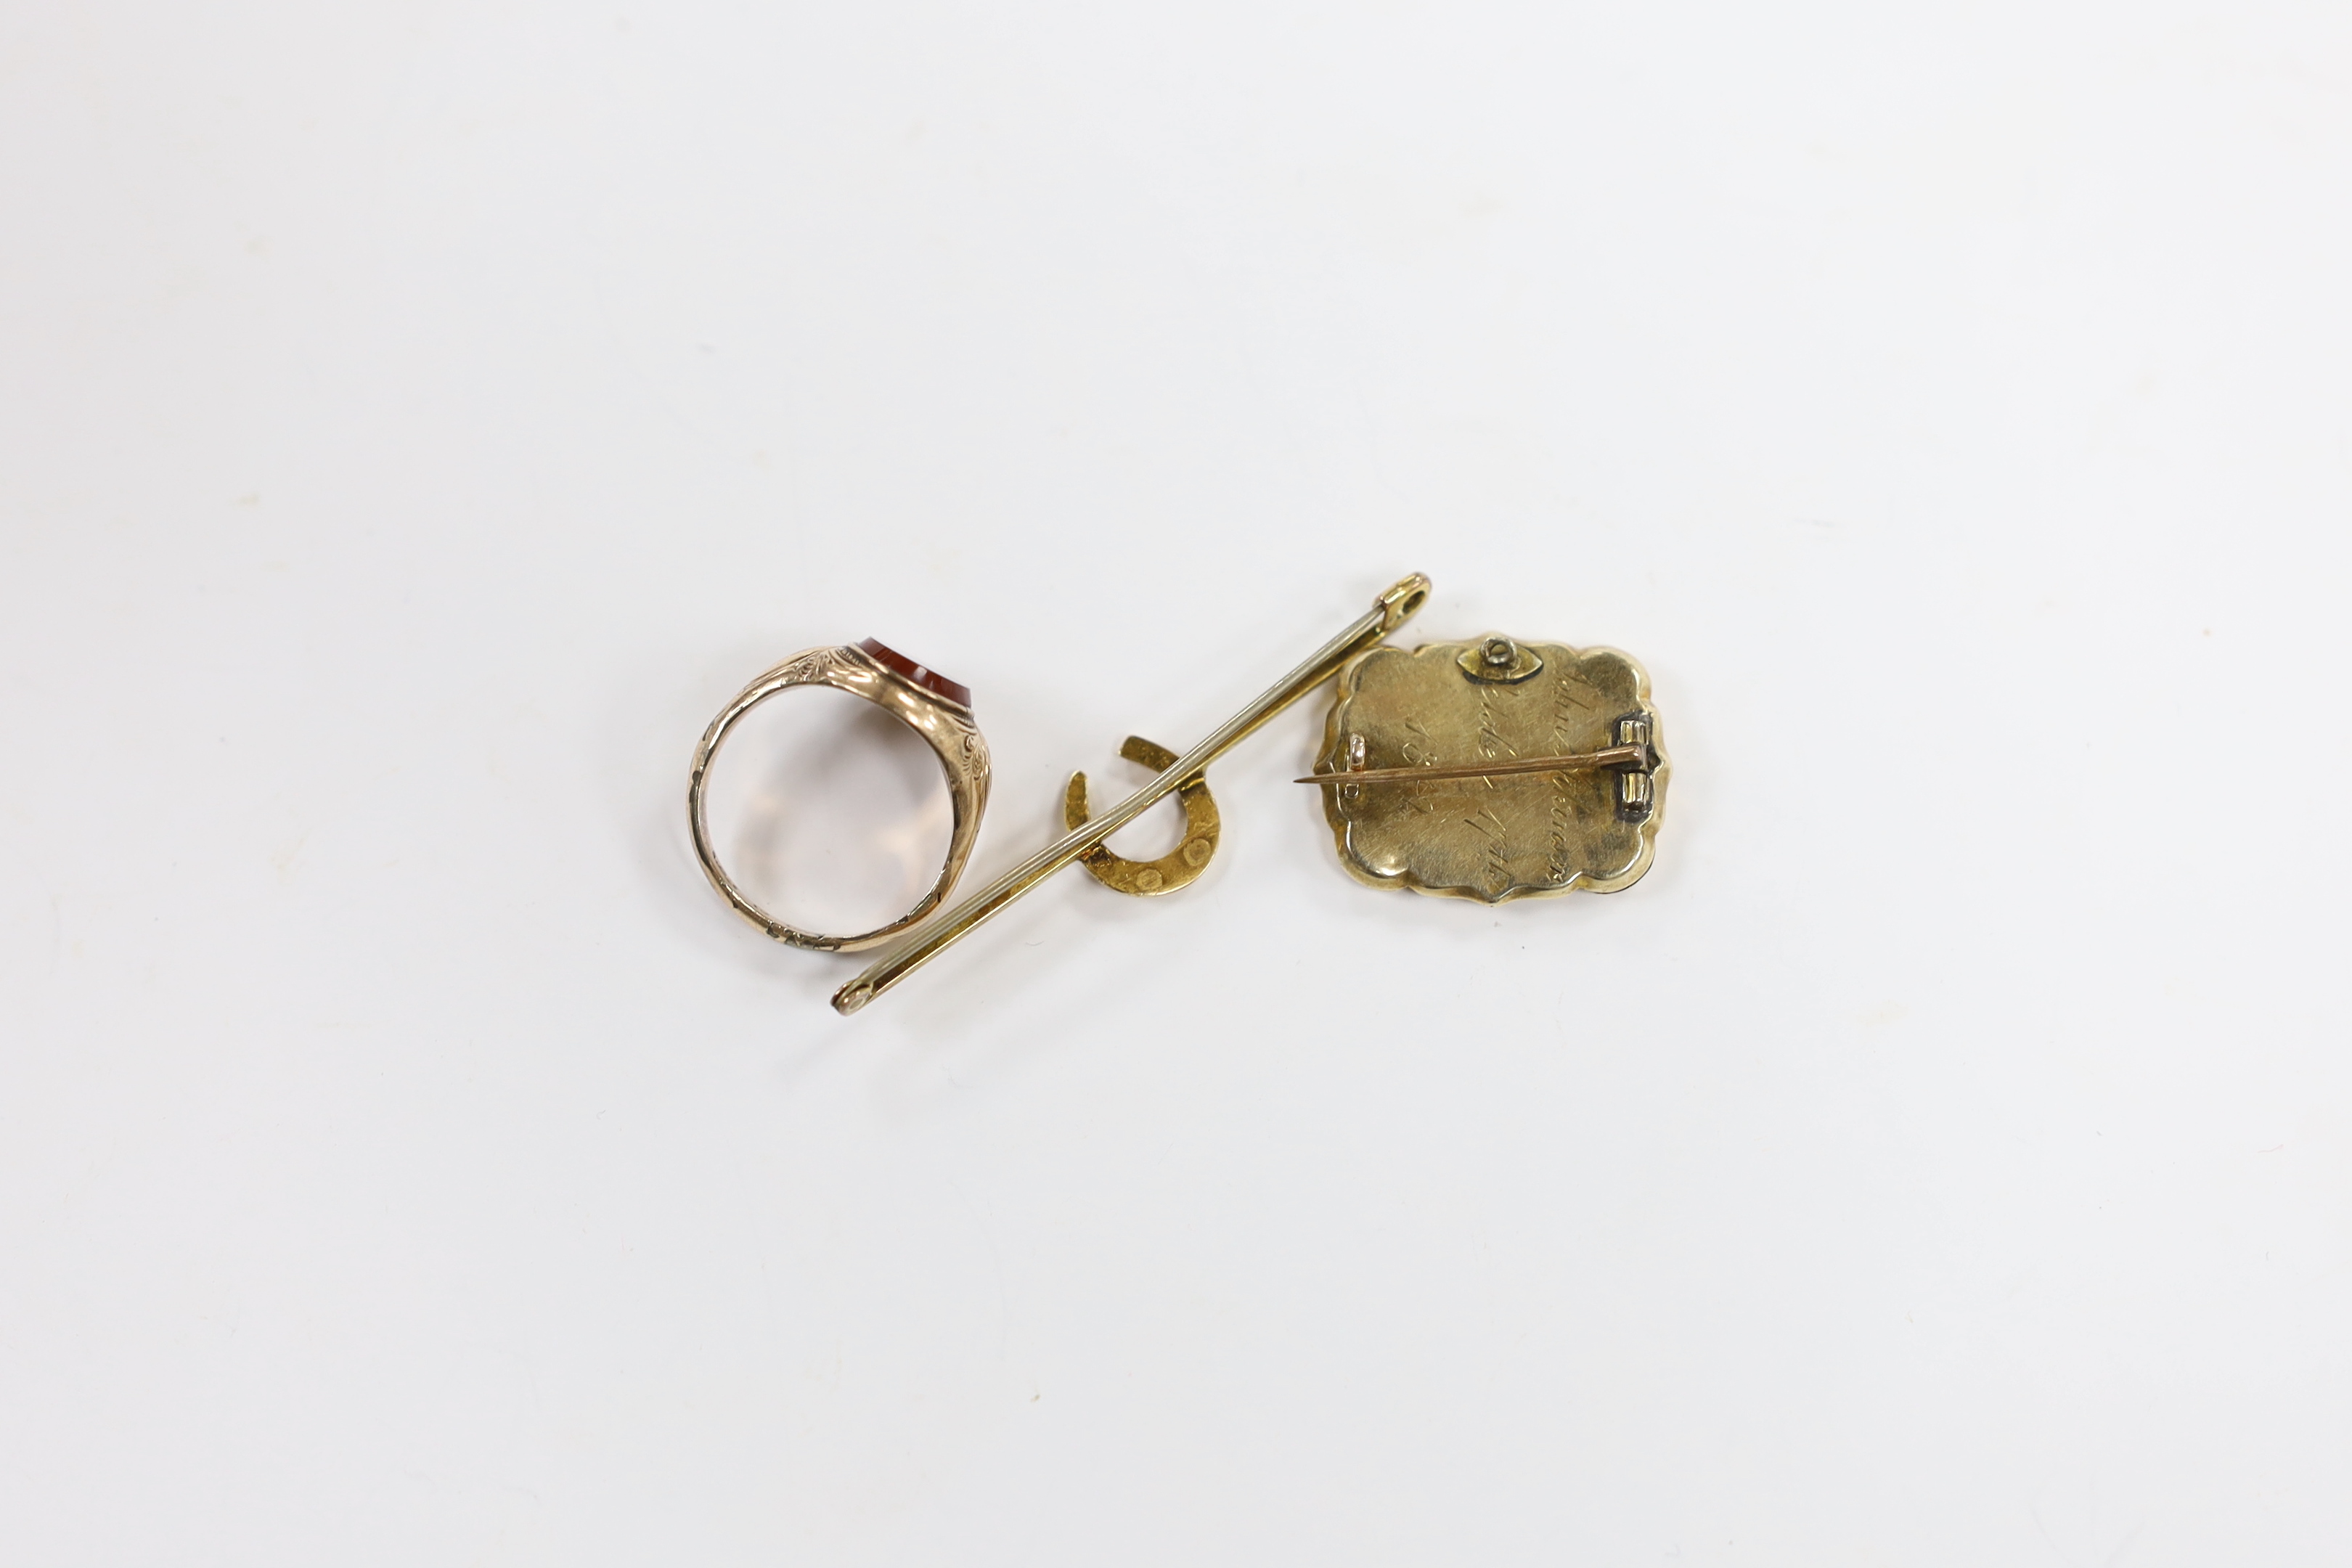 A Victorian 9ct and carnelian set signet ring, size L, an early Victorian yellow metal and plaited hair set mourning brooch, dated 1842 and a 9ct horseshoe bar brooch.